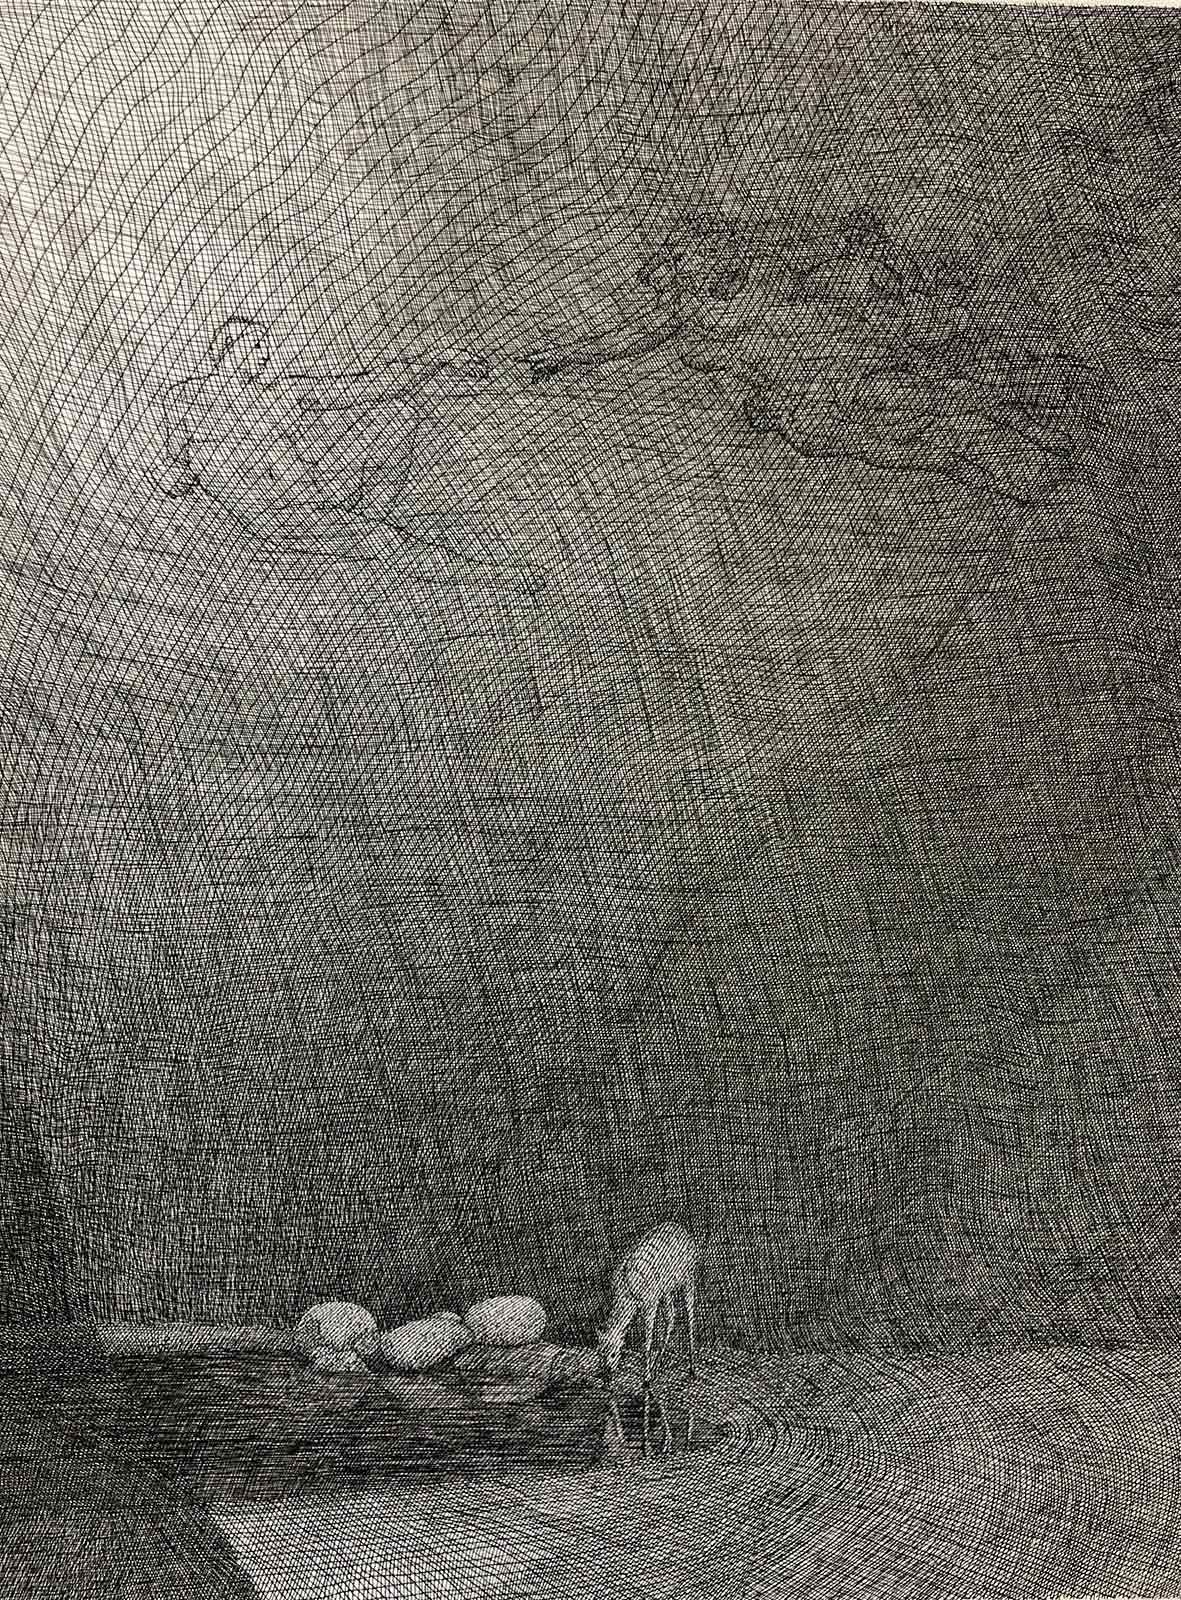 Mark Alexander pen and ink: Deer by water in cave, intricate grid shading with faint overhead figures.